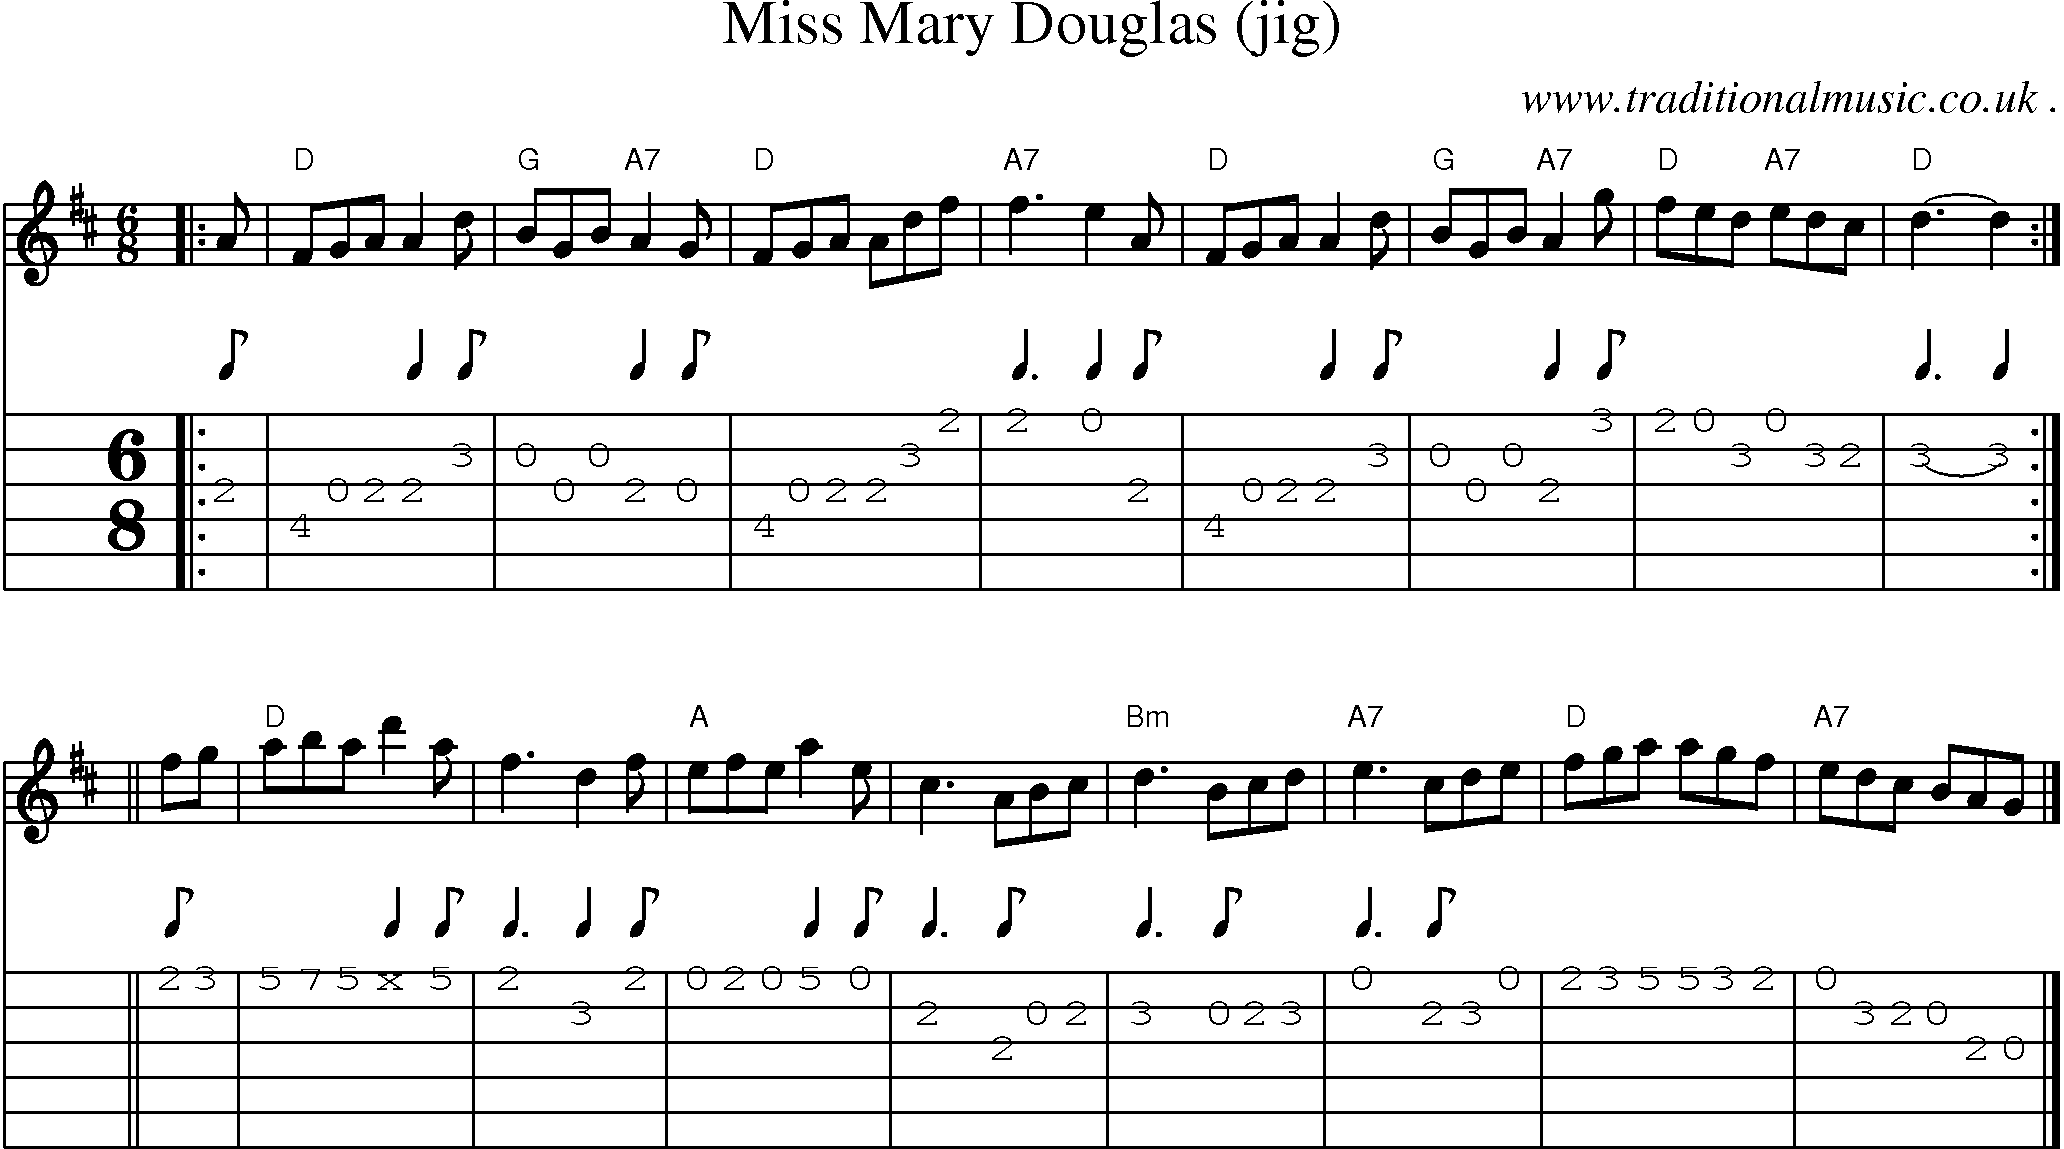 Sheet-music  score, Chords and Guitar Tabs for Miss Mary Douglas Jig